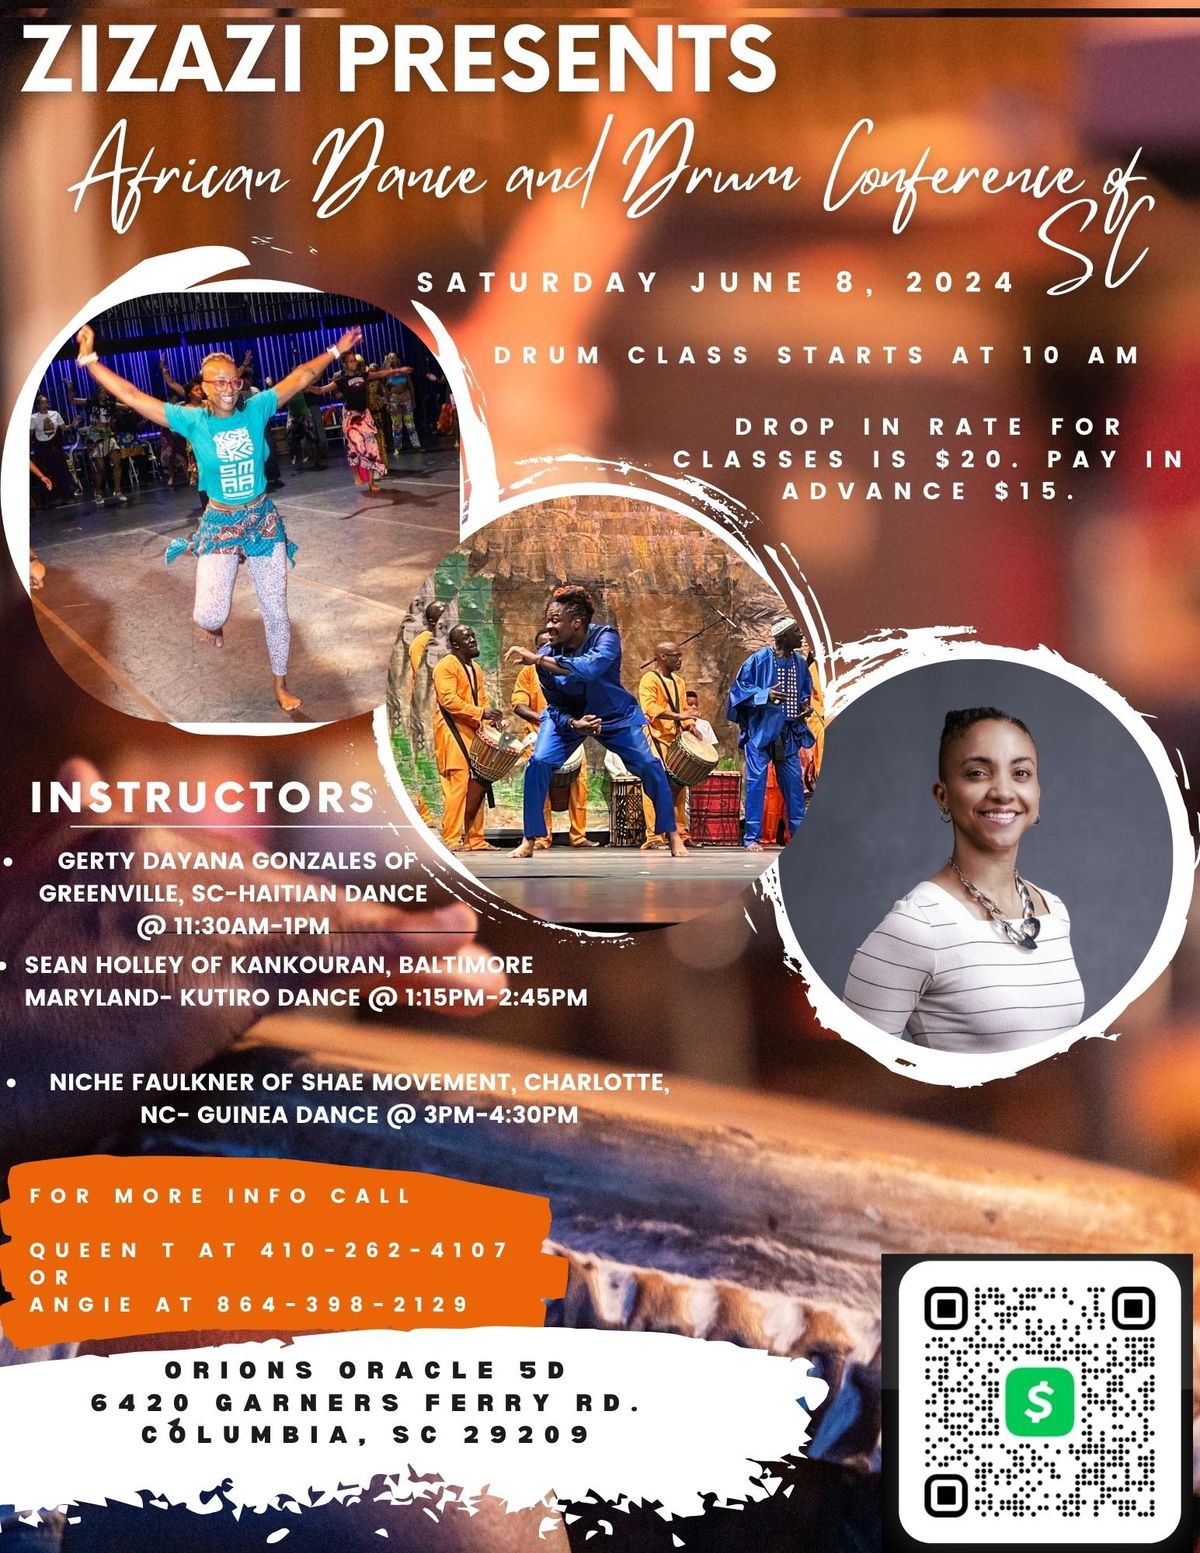 Zizazi West African Drum and Dance Conference 